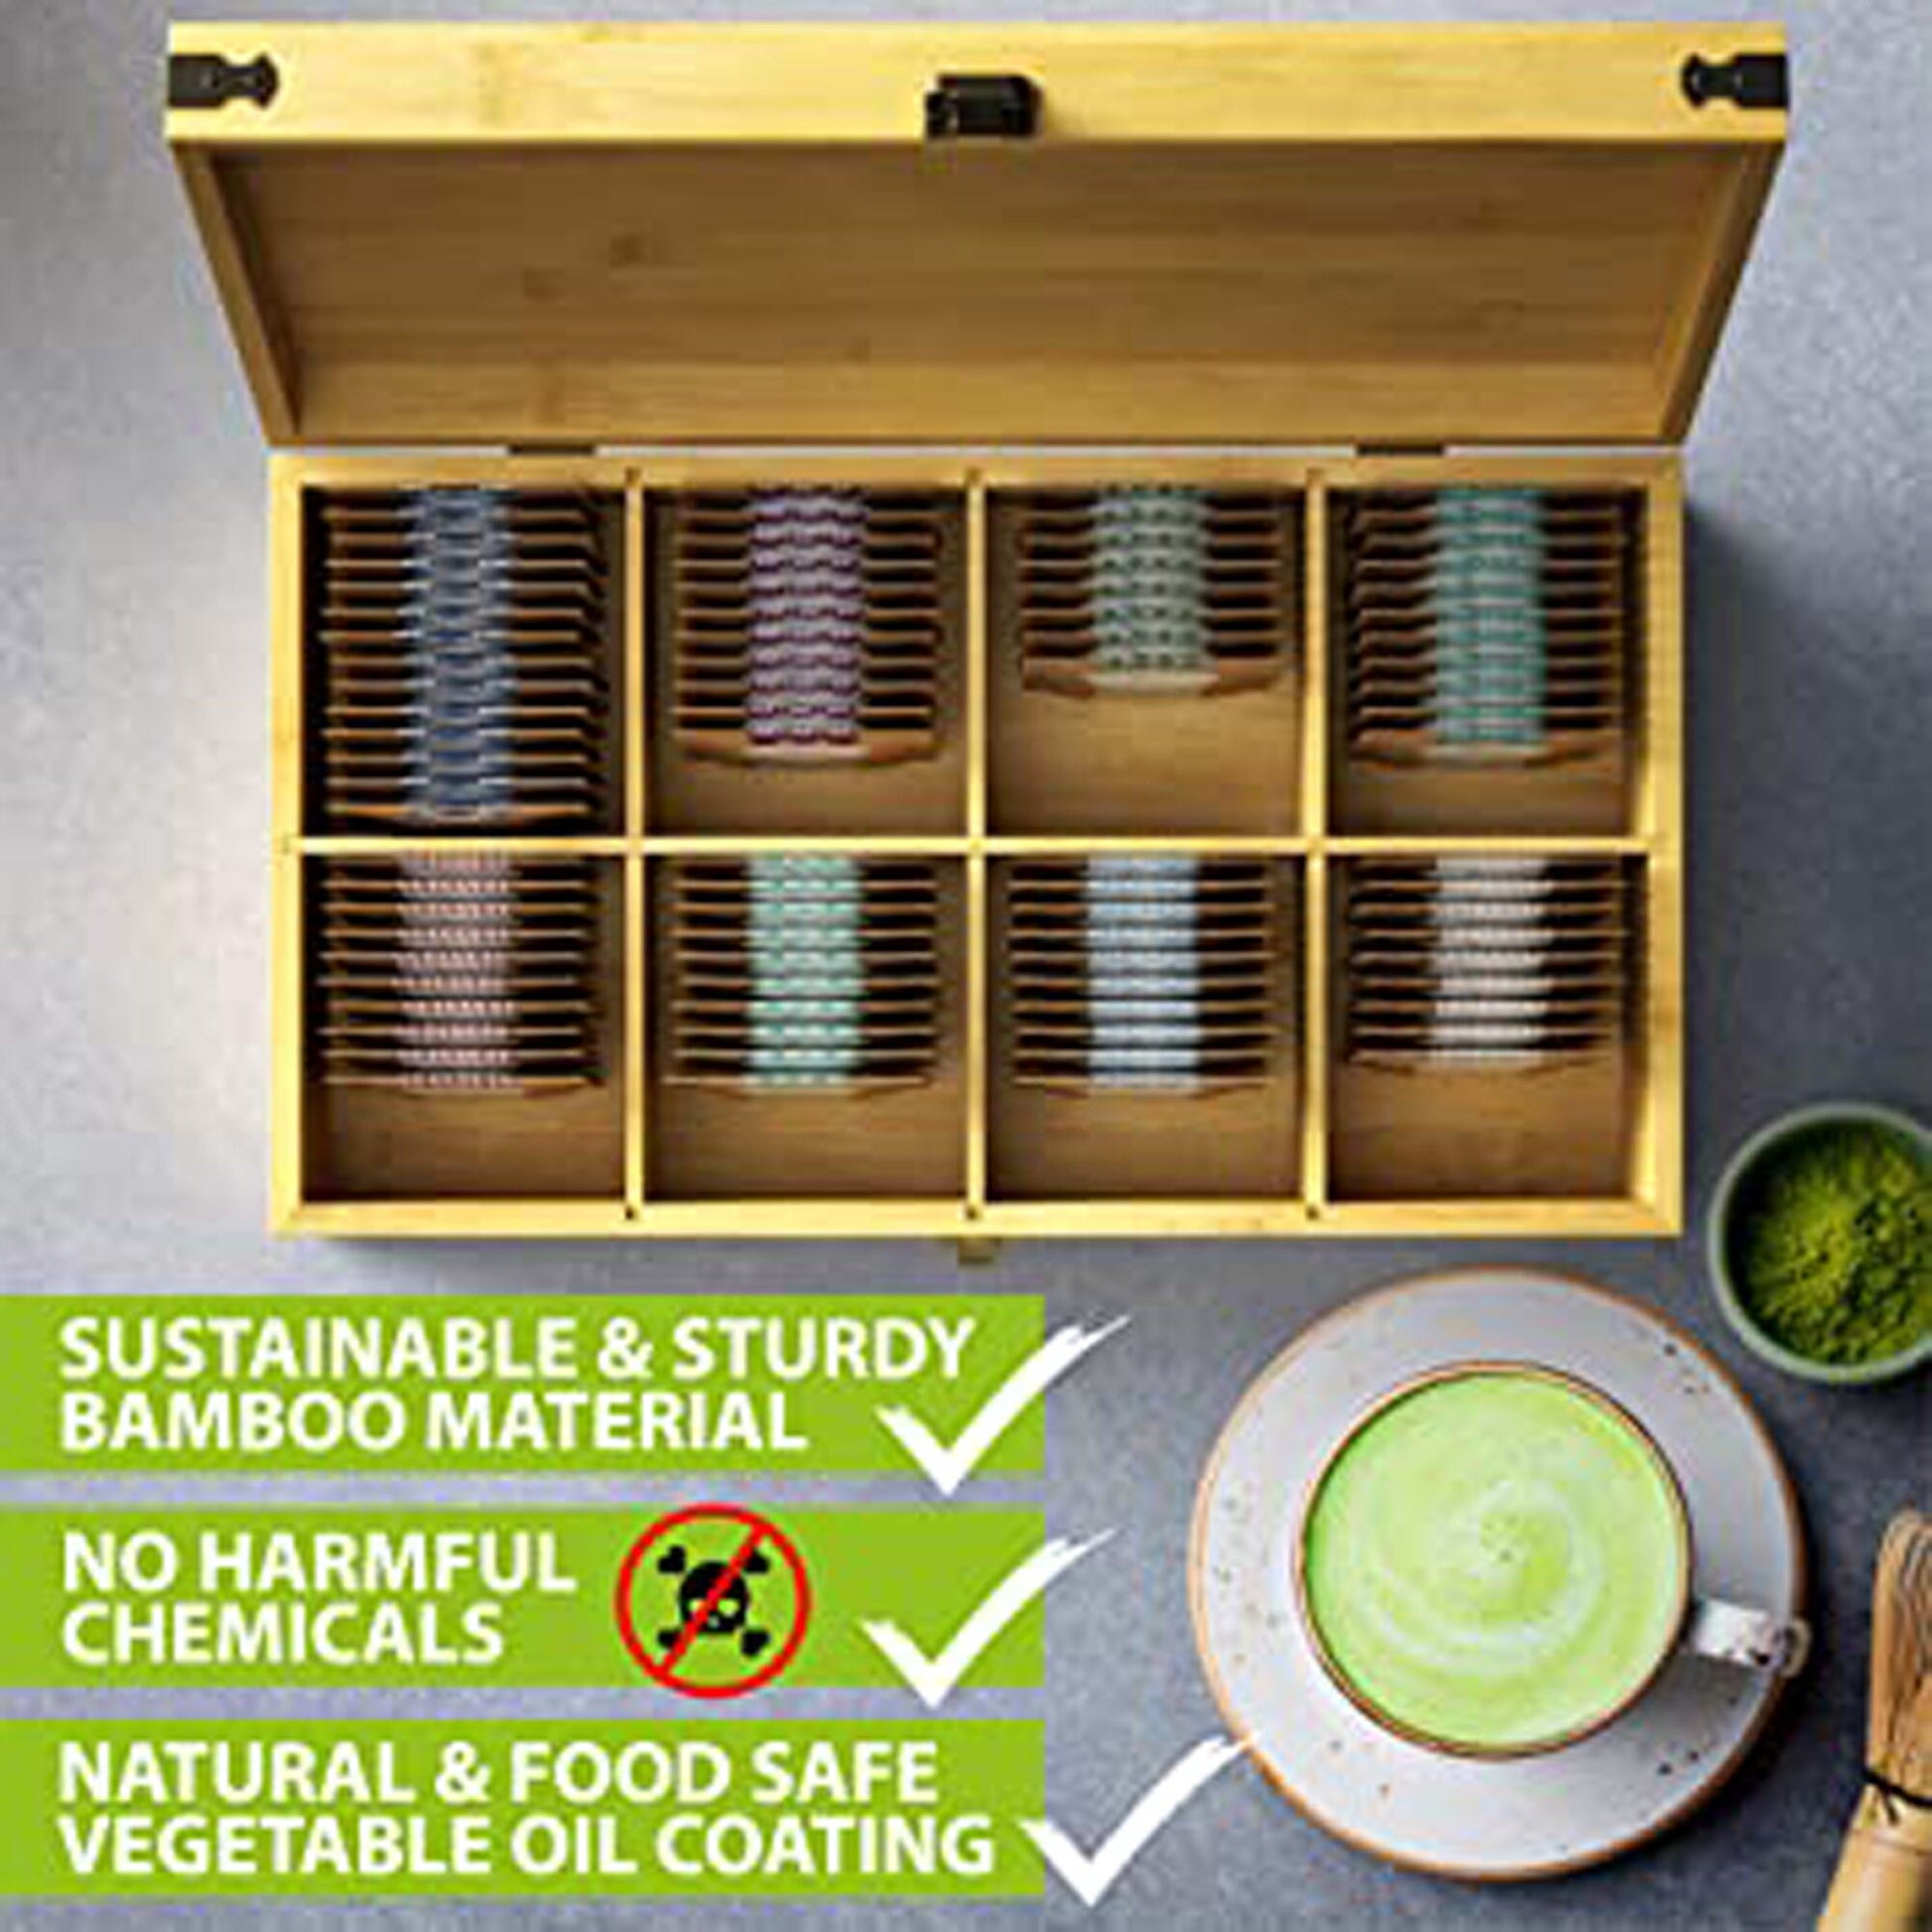 Zen Earth Inspired Bamboo Tea Organizer Box Chemical Free Eco-Friendly Big,  Tall, Adjustable Cubbies Natural Wooden Storage Chest (4-Slot Rectangle